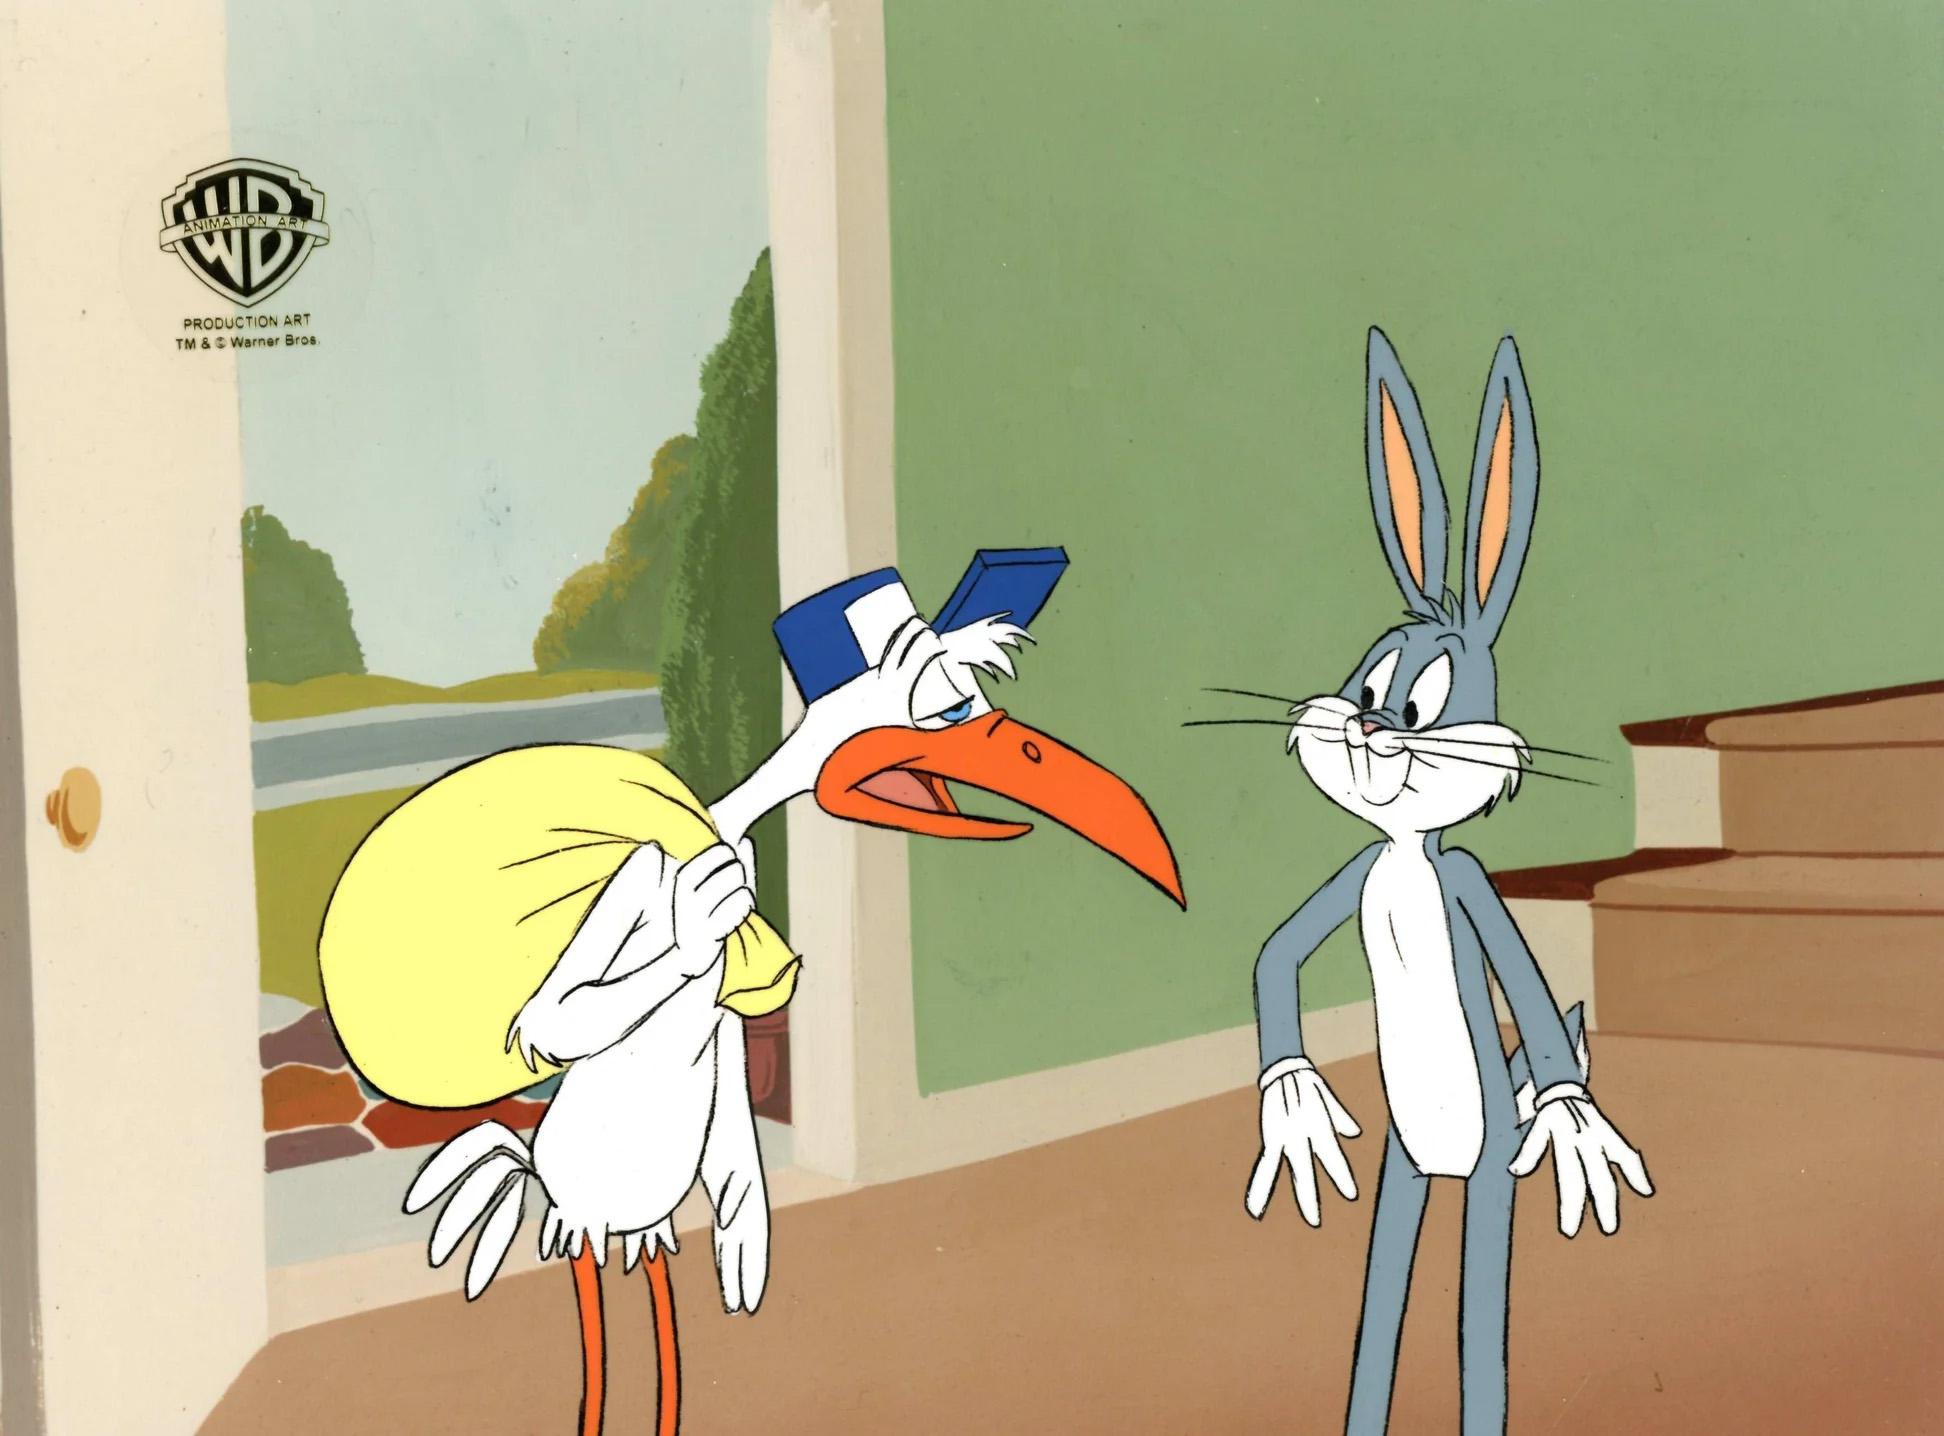 Looney Tunes Original Production Cel: Bugs Bunny and Drunk Stork - Art by Looney Tunes Studio Artists